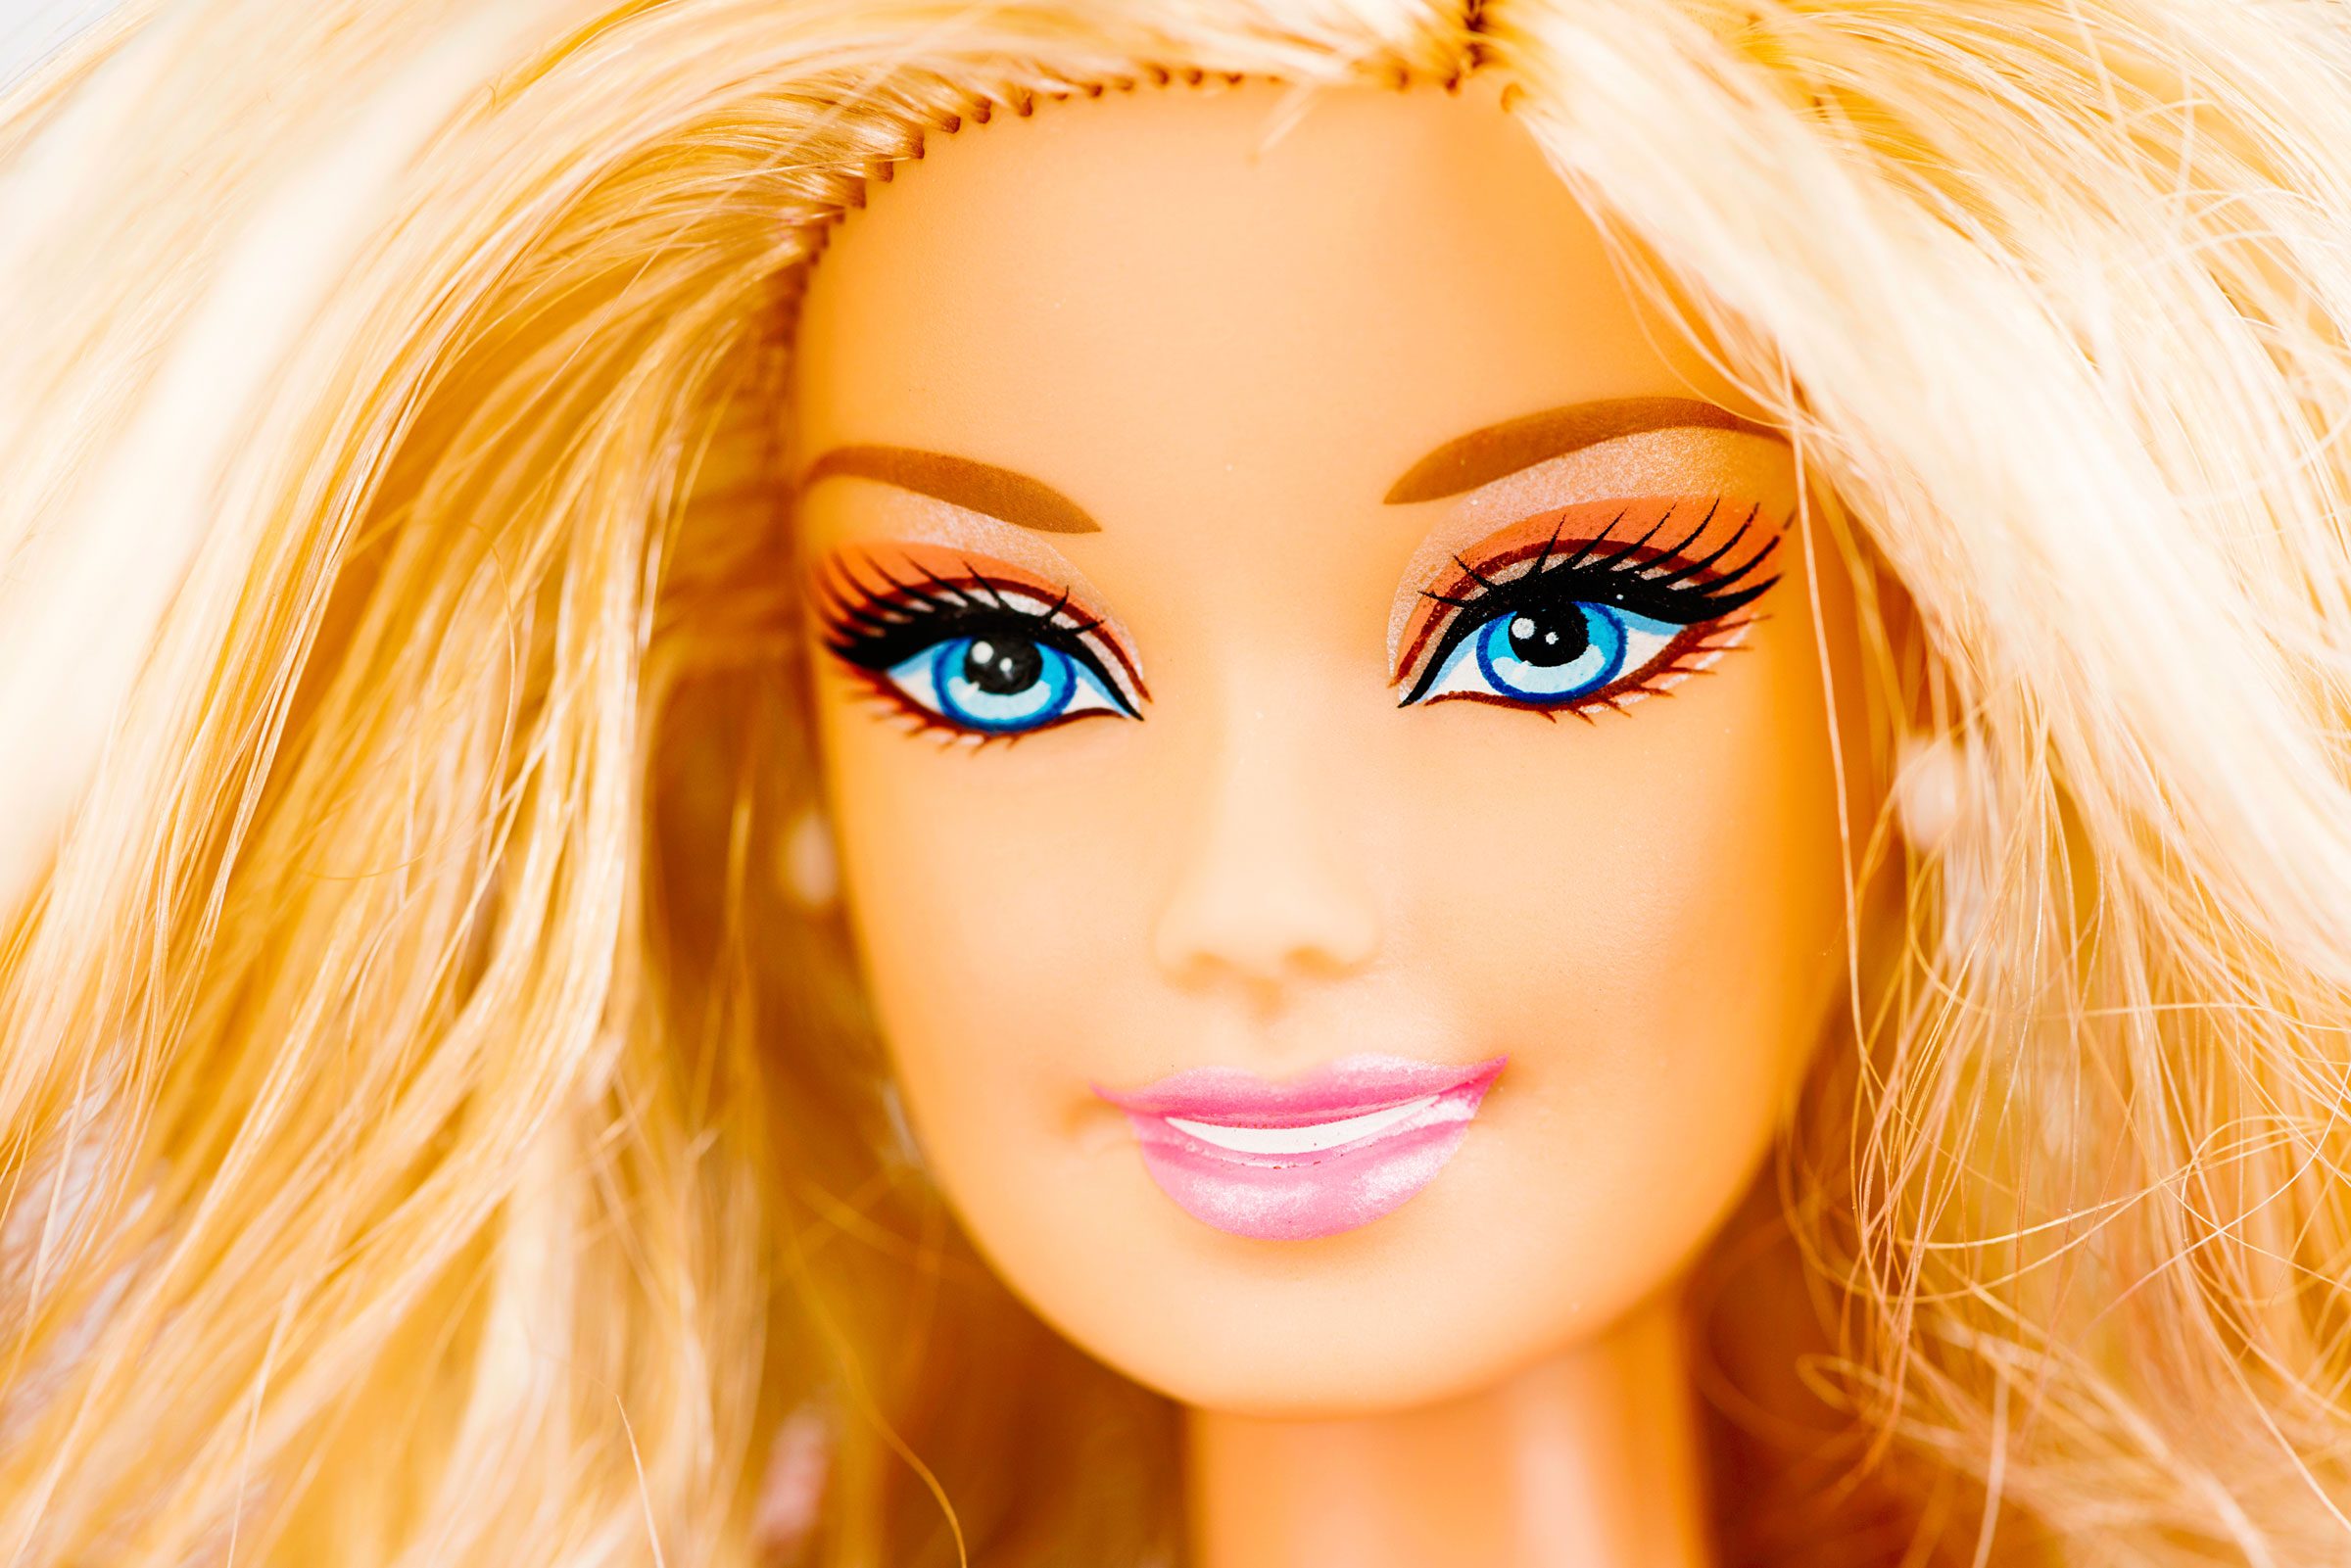 17-things-you-don-t-know-about-barbie-reader-s-digest